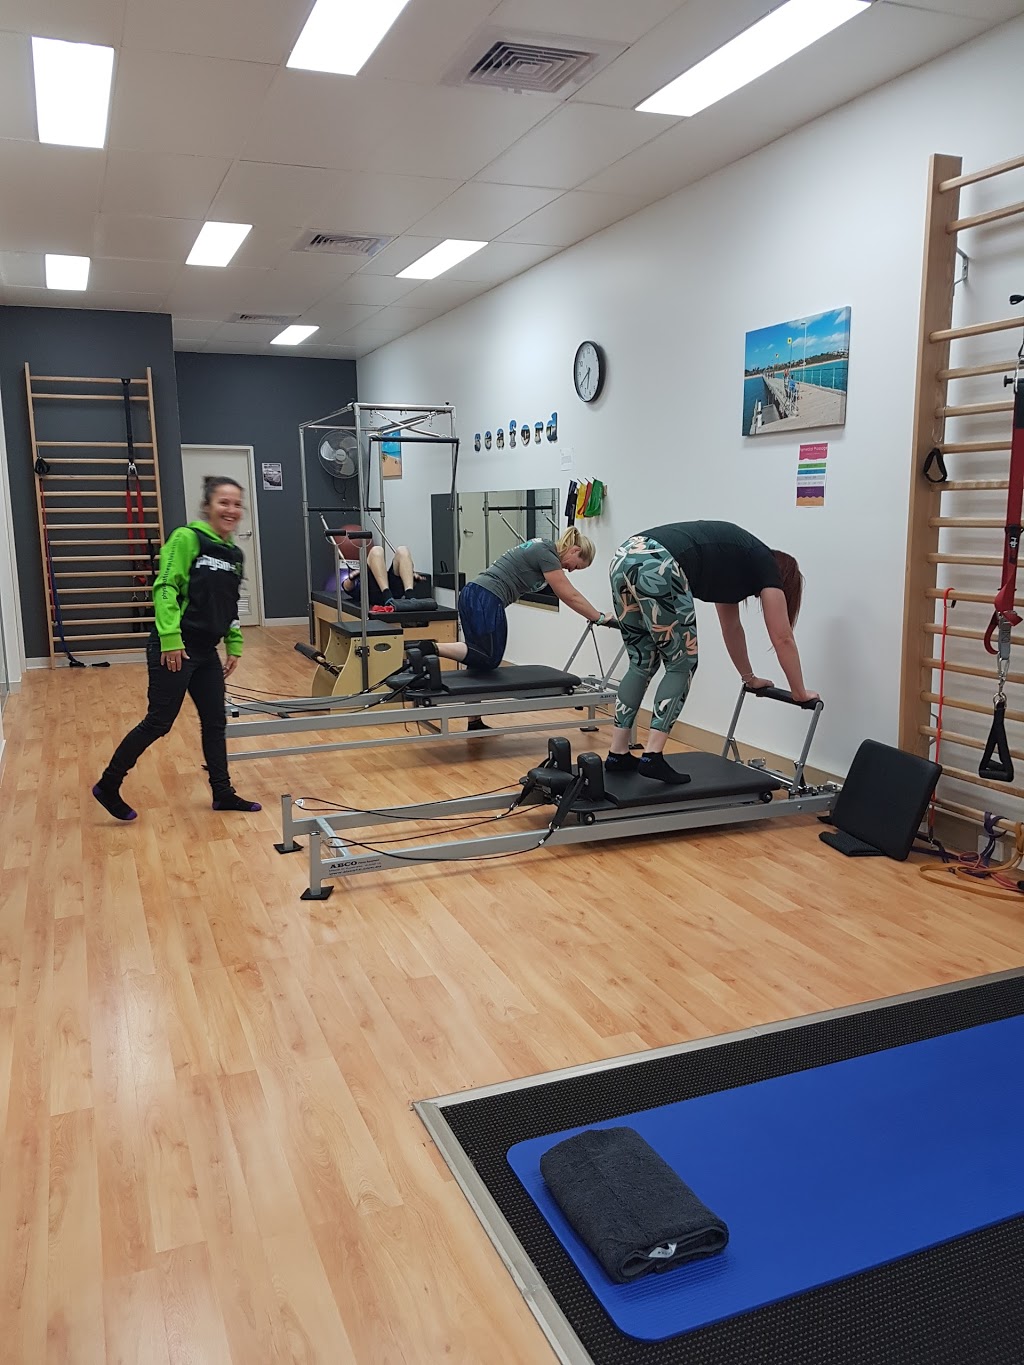 Physio And Fitness Clinic | physiotherapist | 112 Nepean Hwy, Seaford VIC 3198, Australia | 0397866642 OR +61 3 9786 6642